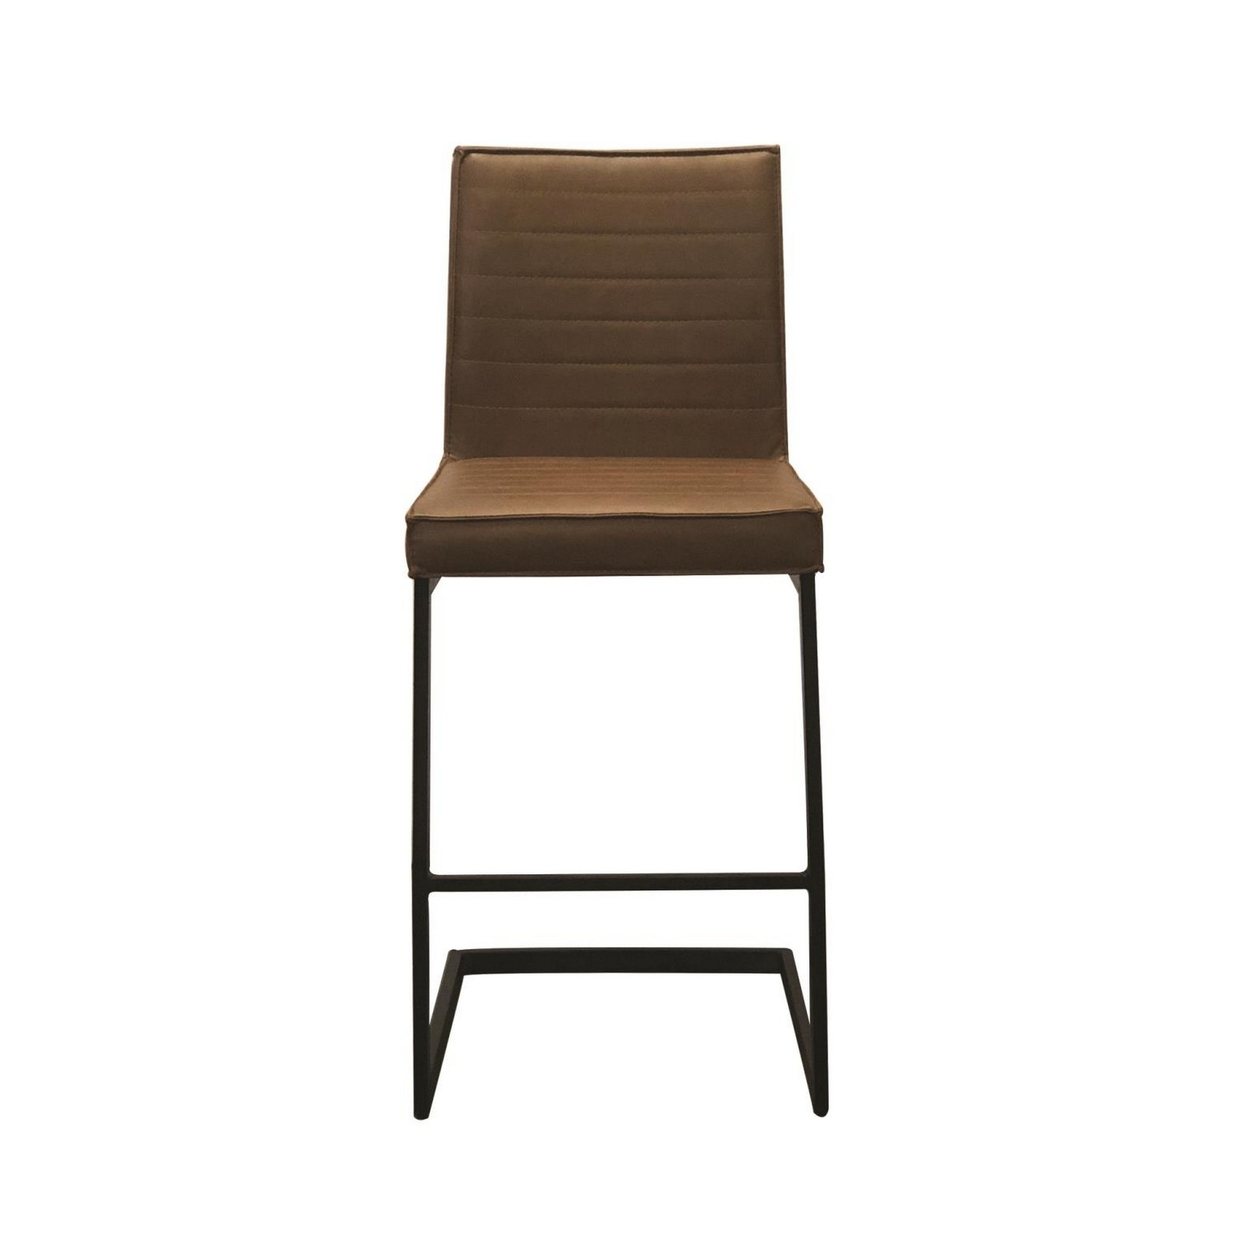 25 Inch Cantilever Counter Stool Chair, Channel Tufted Brown Vegan Leather- Saltoro Sherpi